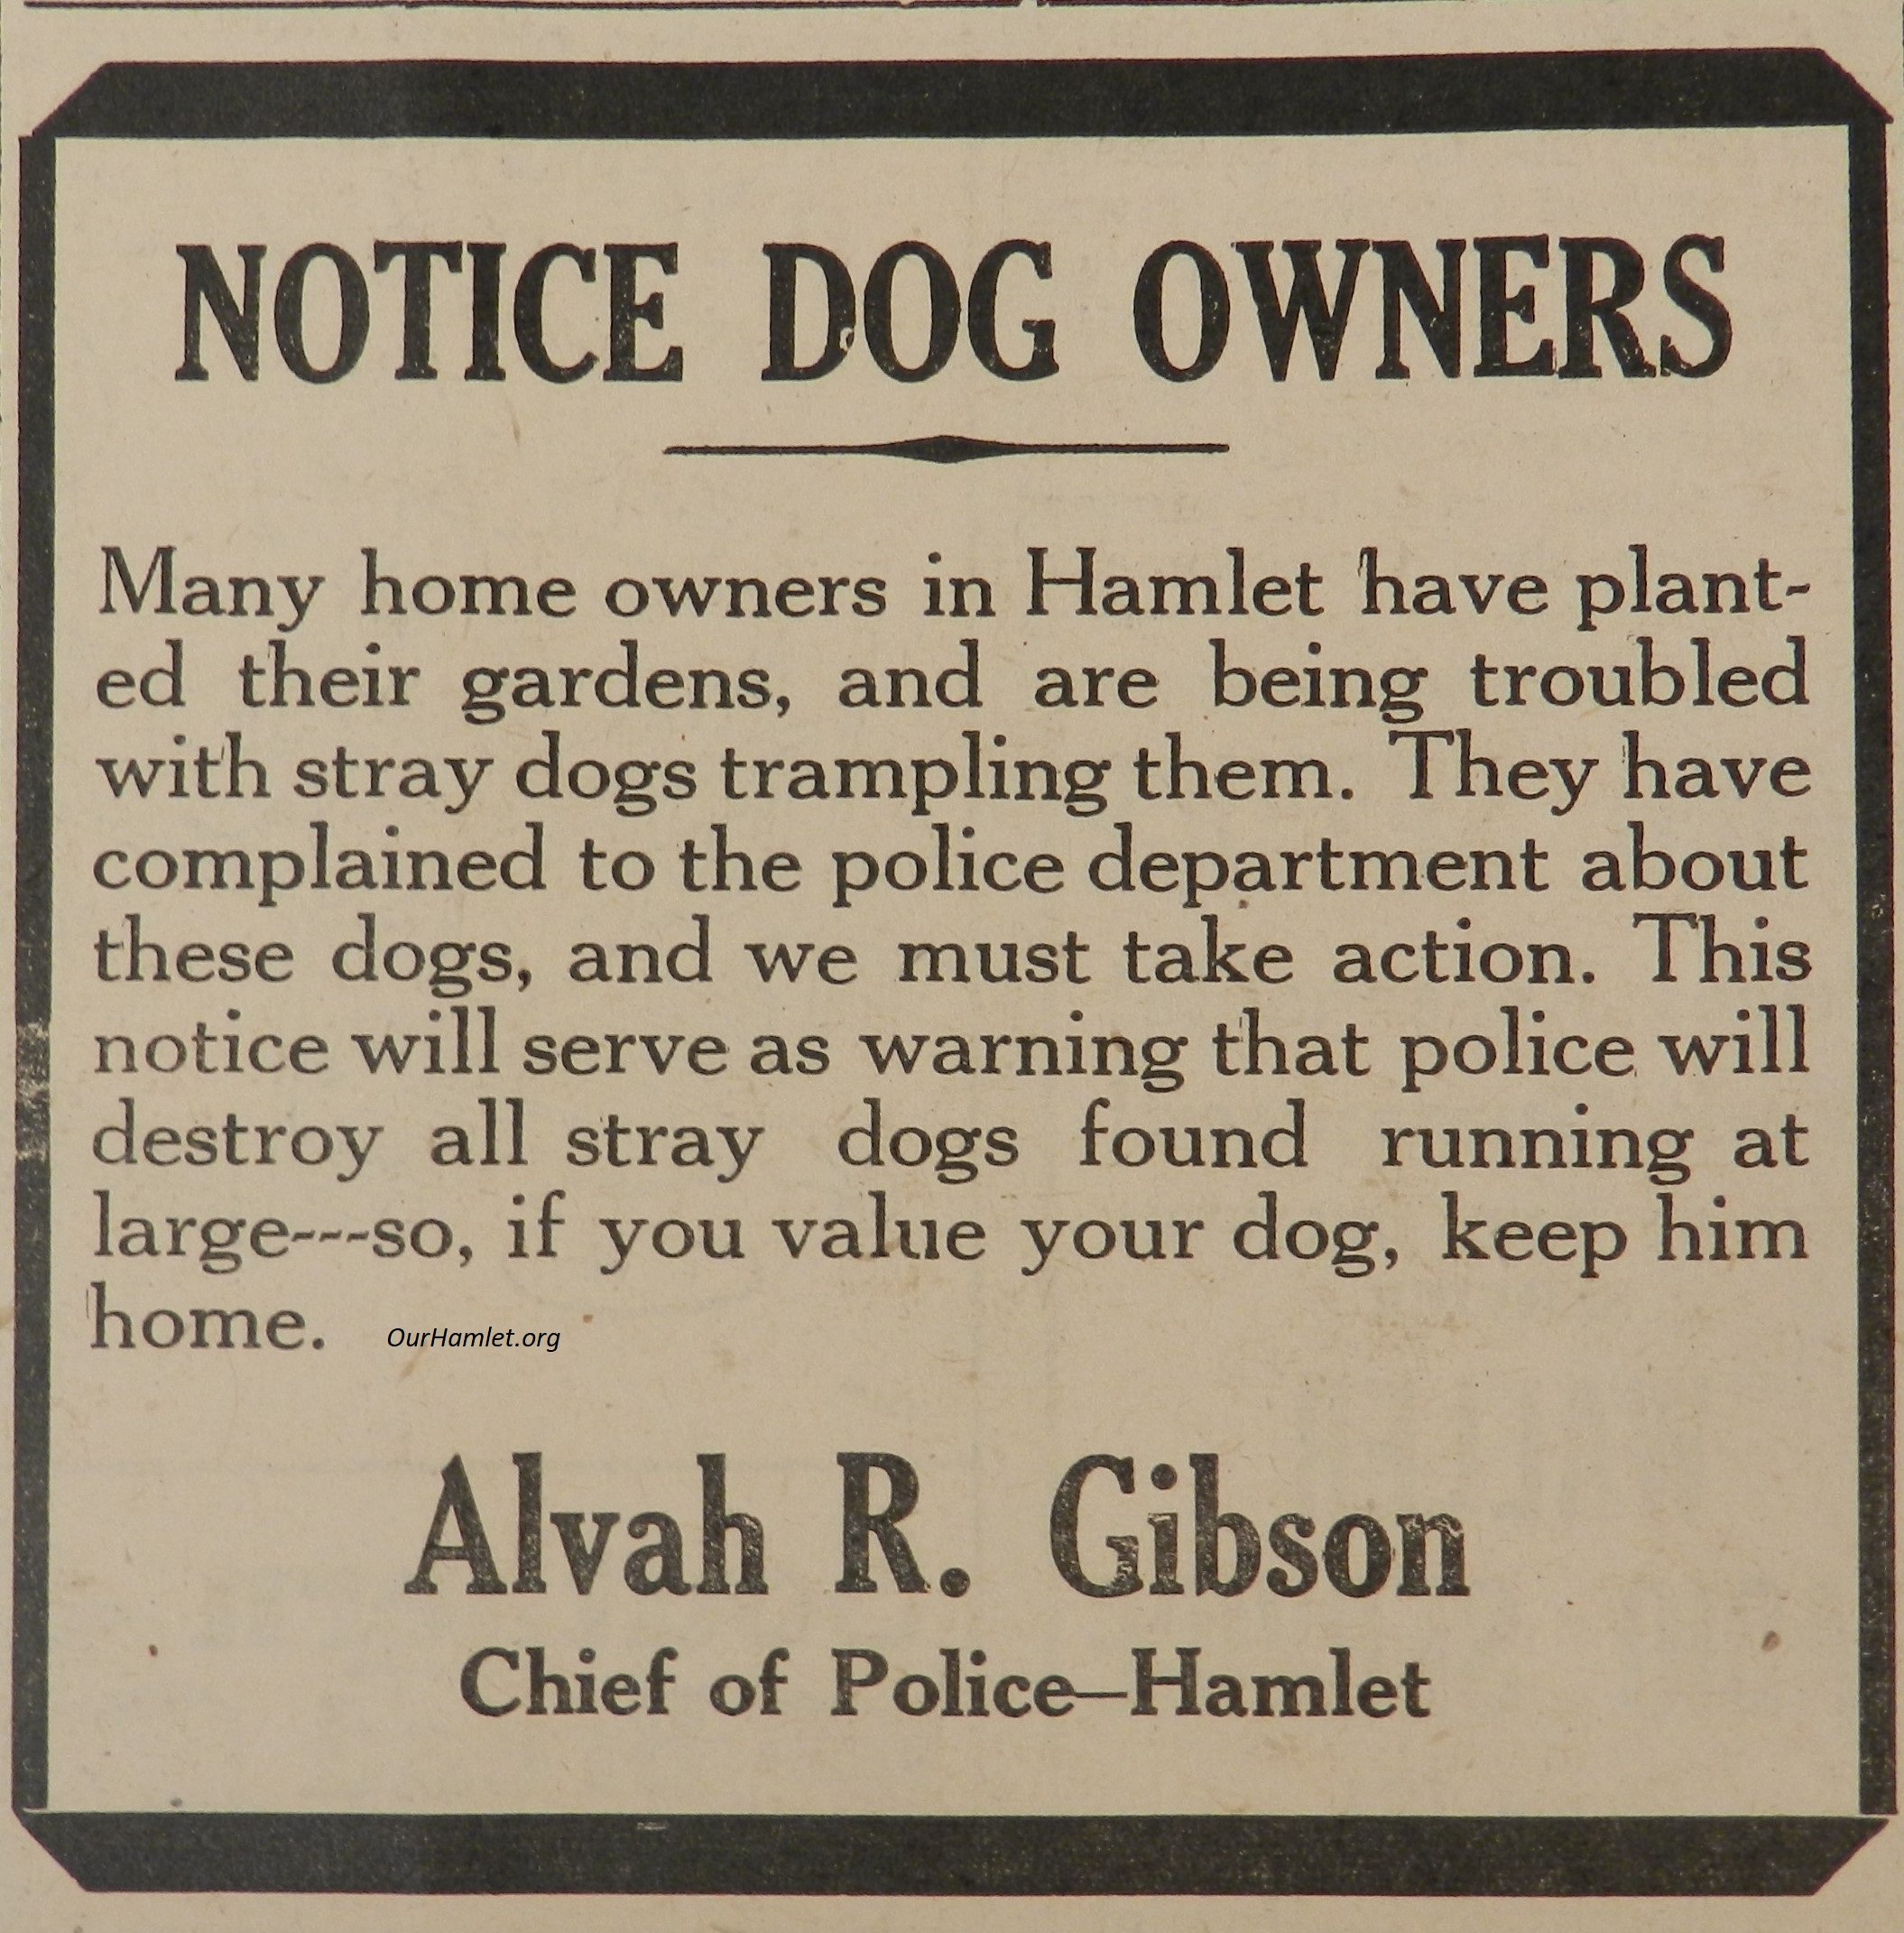 1946 Dog owners OH.jpg